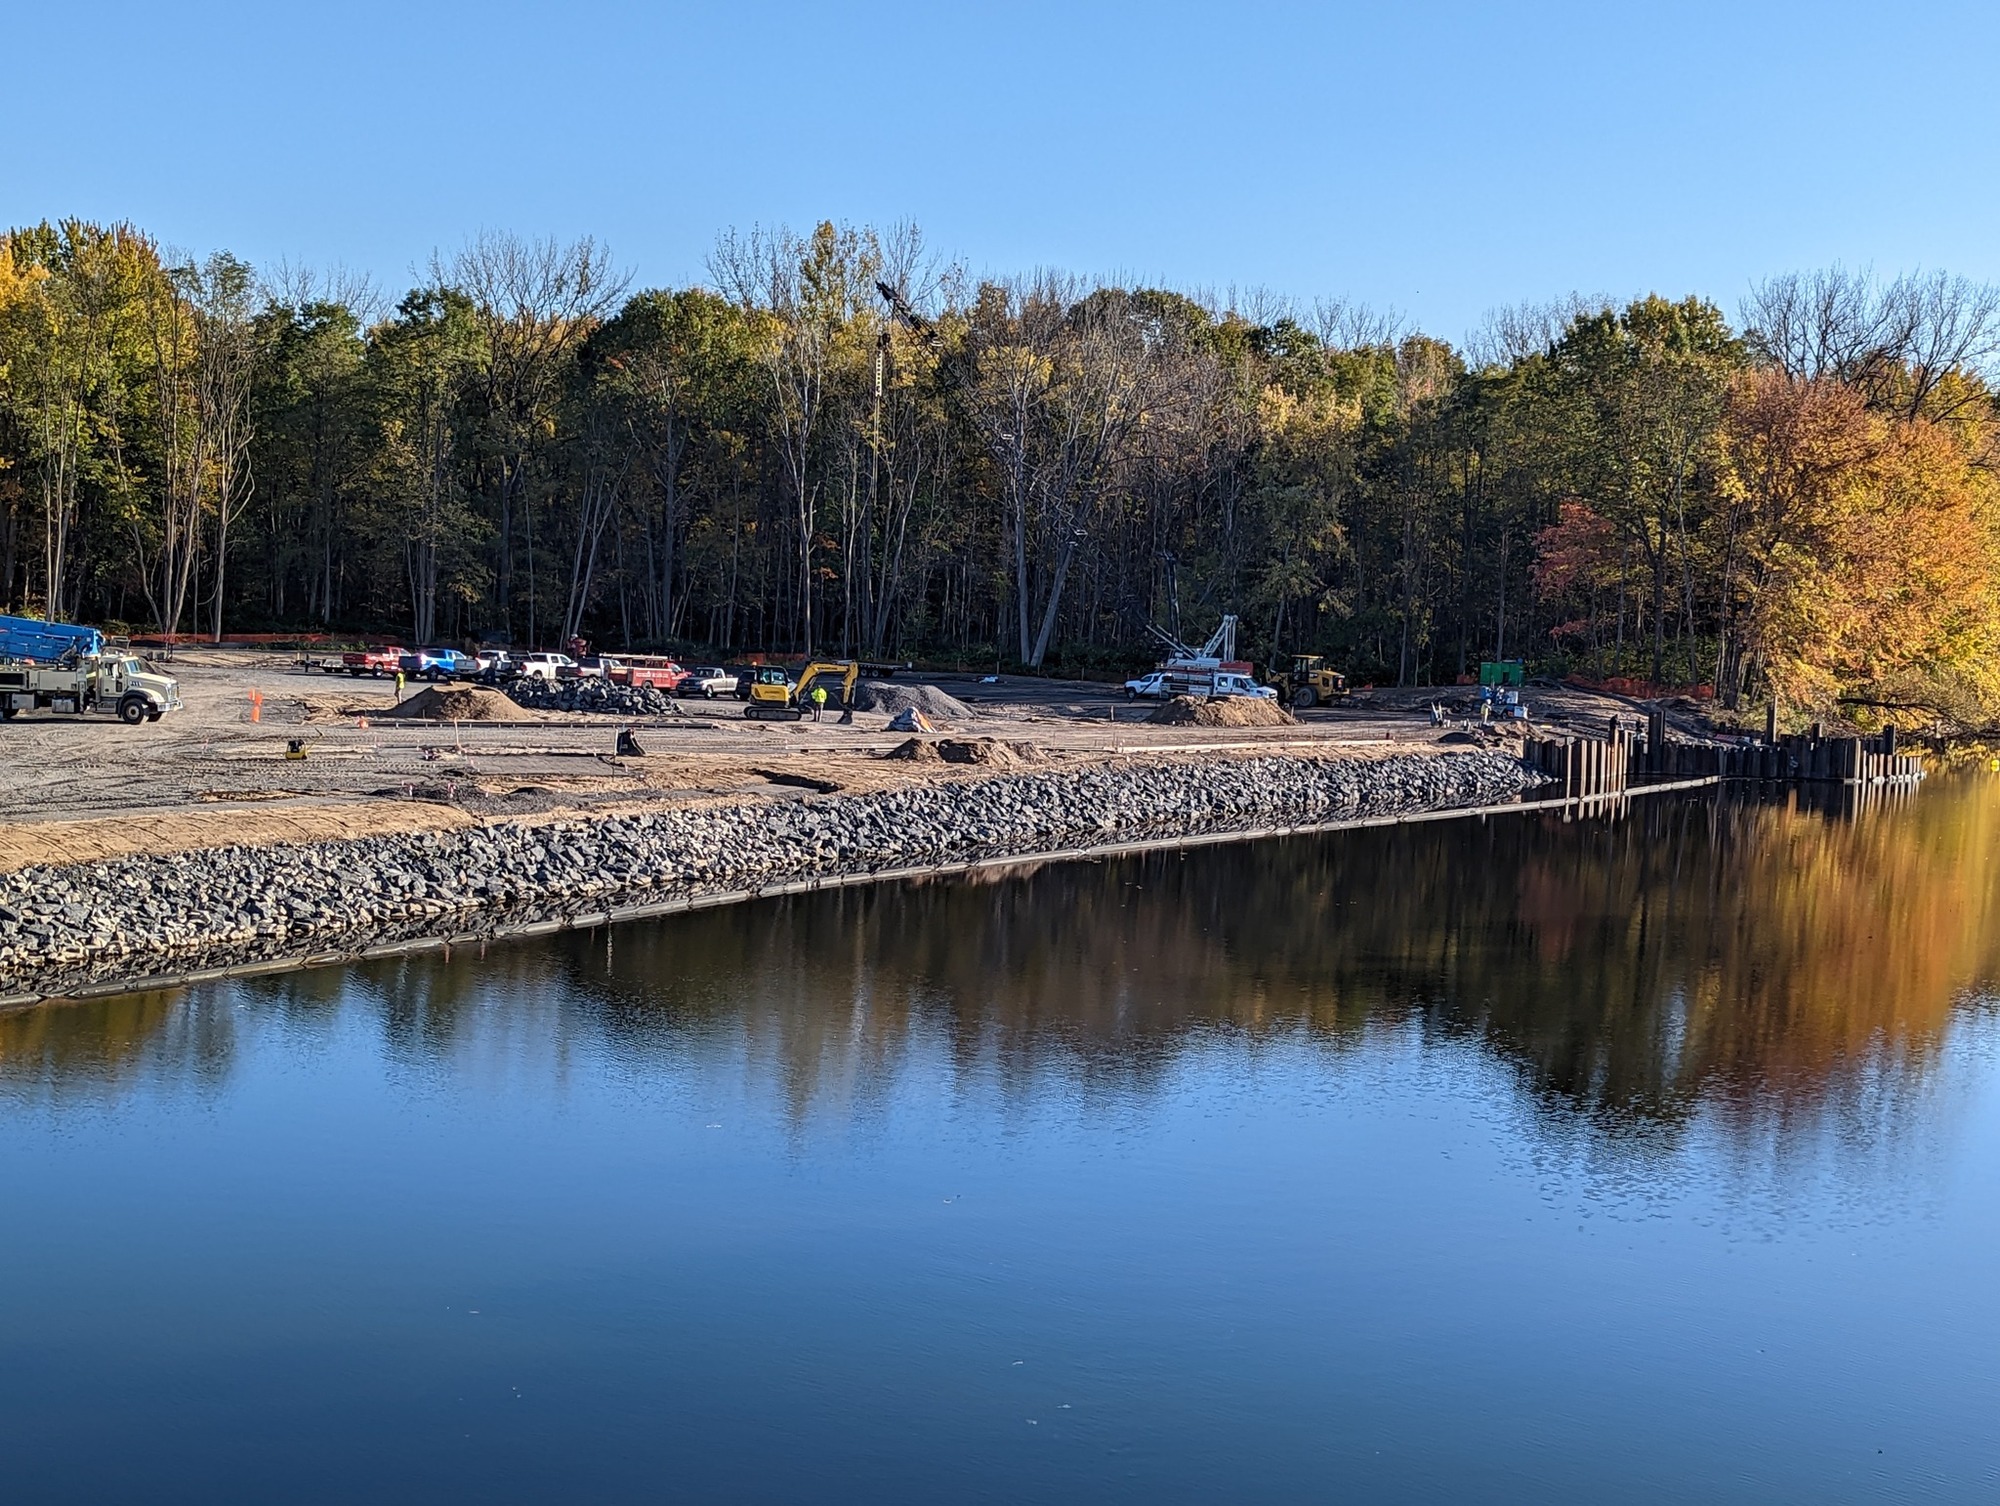 The construction at the new Oneida Lake Boat Launch